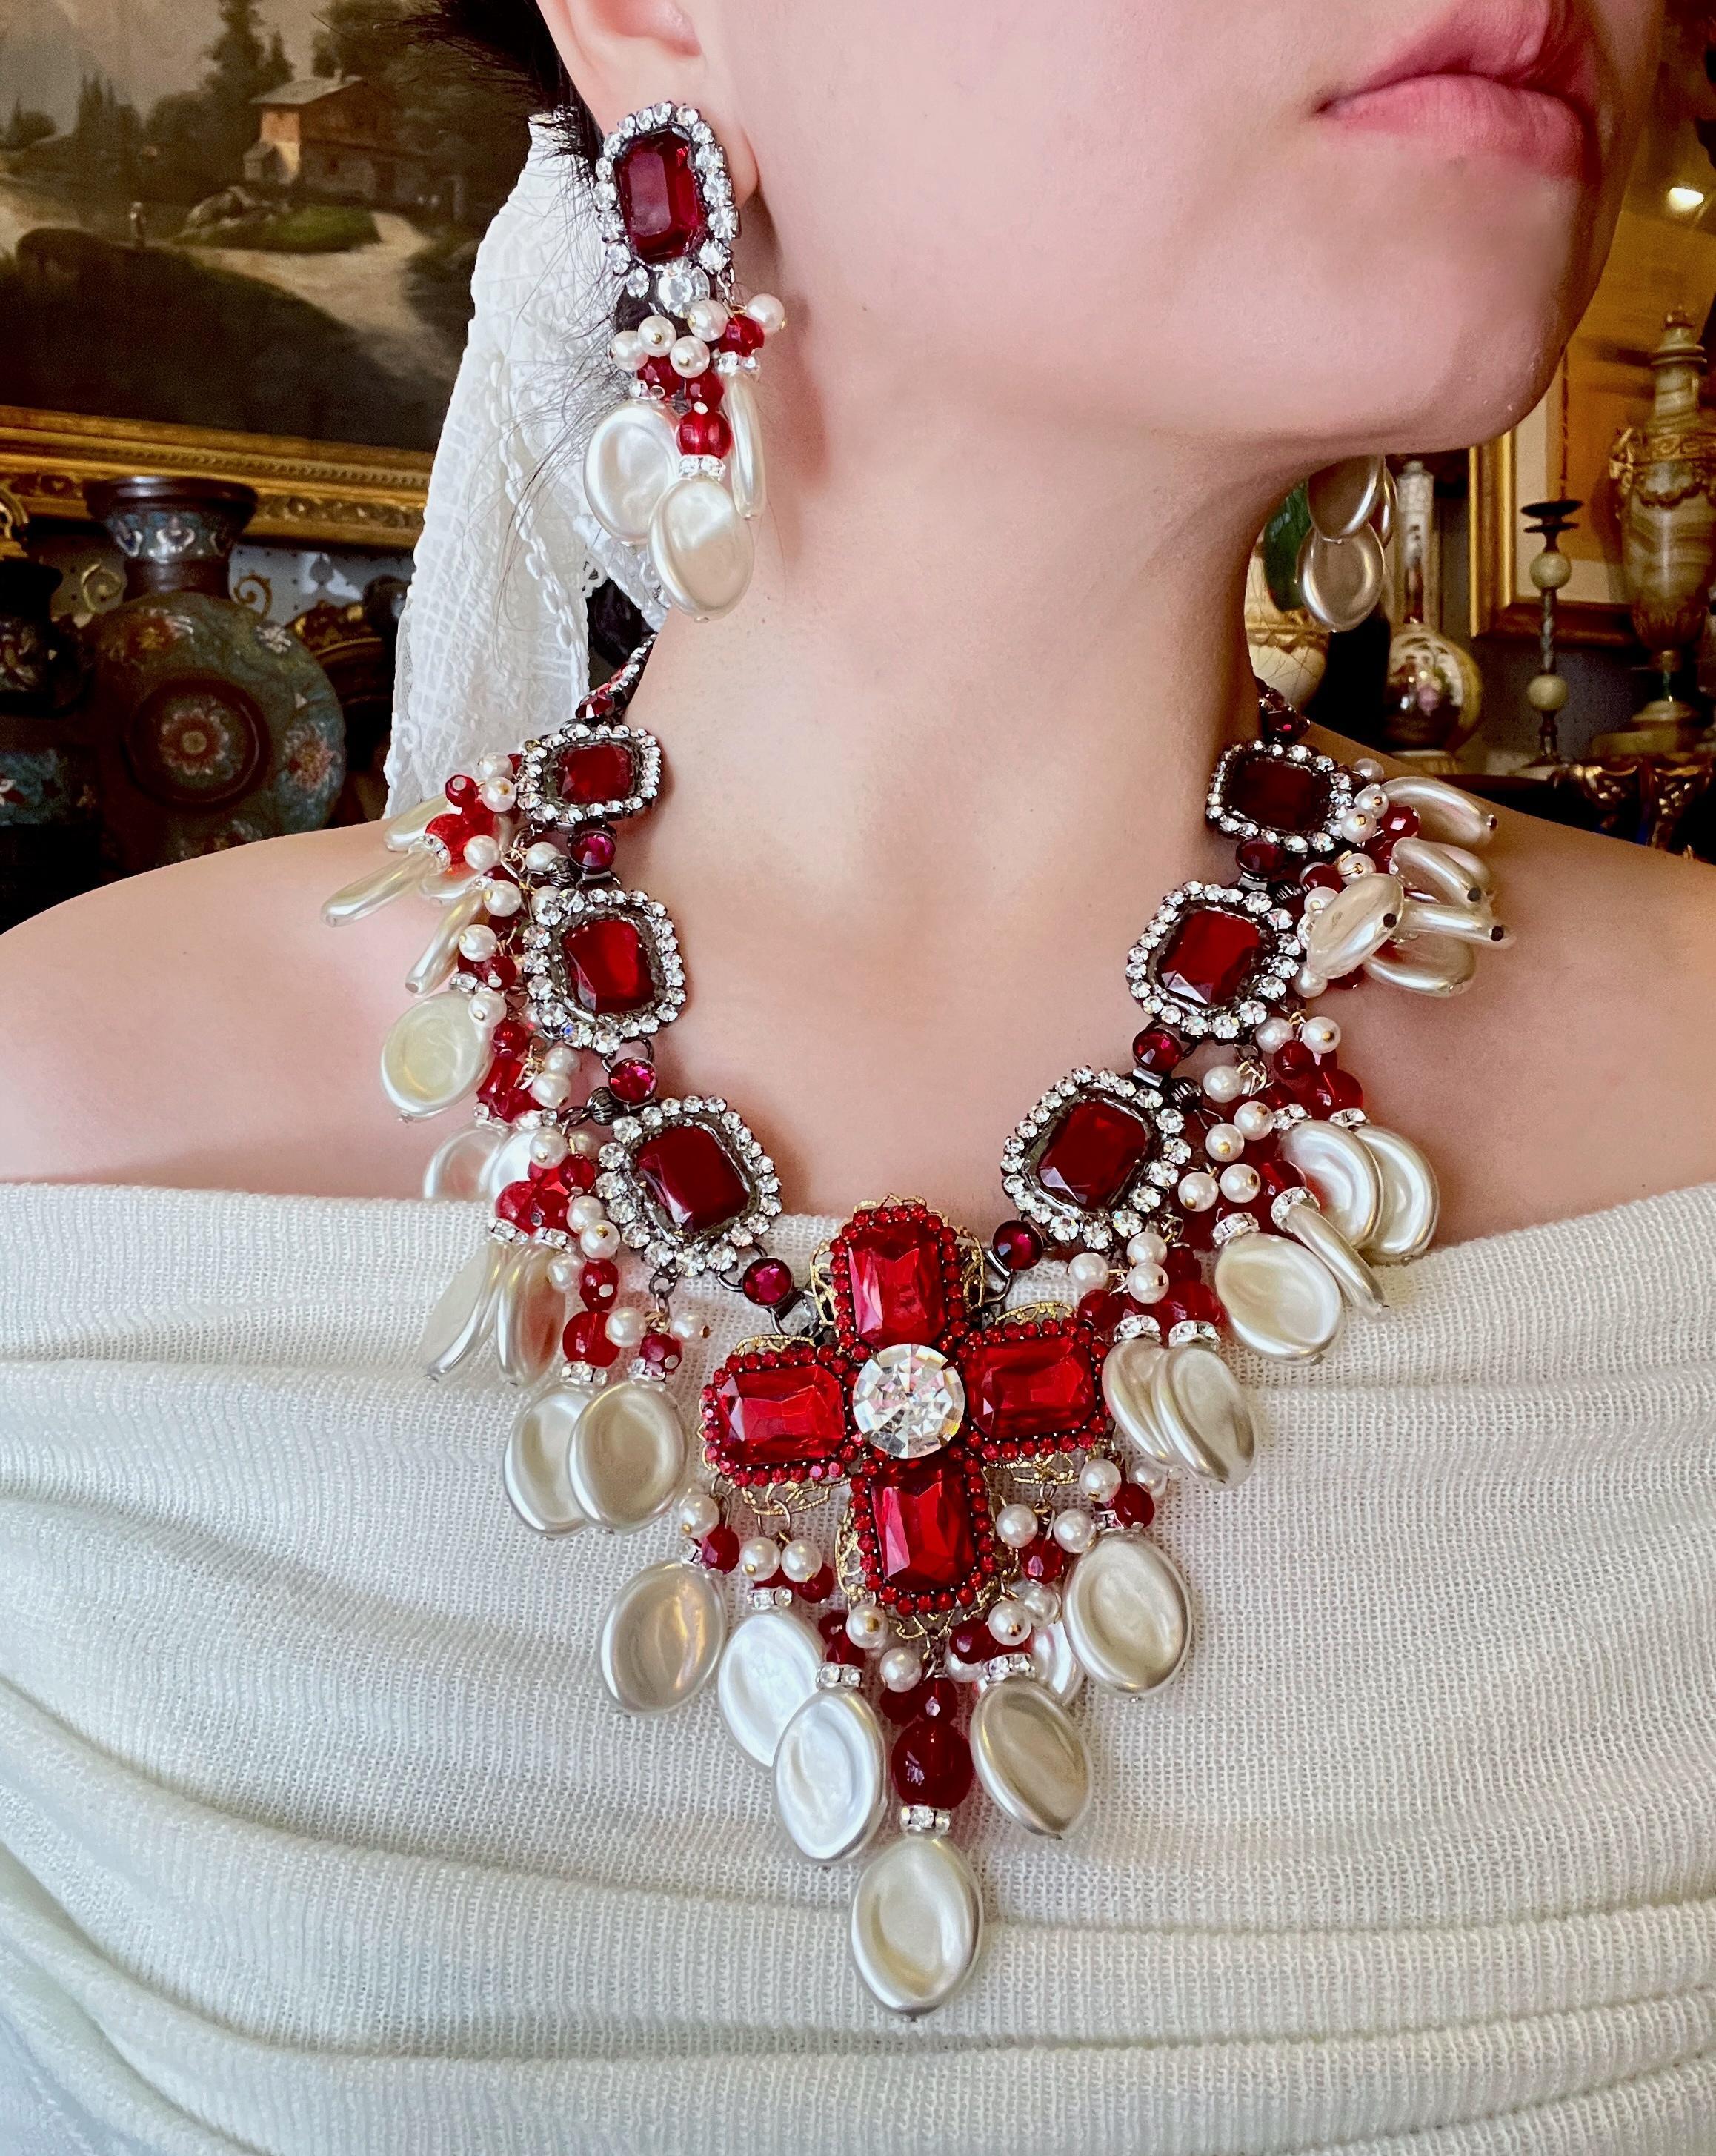 Rare Lawrence Vrba Red Rhinestone Faux Baroque Pearl Necklace & Earrings Parure

Marked:
Lawrence VRBA

Approximate Dimensions: 

Necklace:
51 cm (Unclasped Length) 
11.7 cm -1.3 cm (Width) 
224.9 grams in weight.

Earrings:
8 cm (Length) 
5 cm